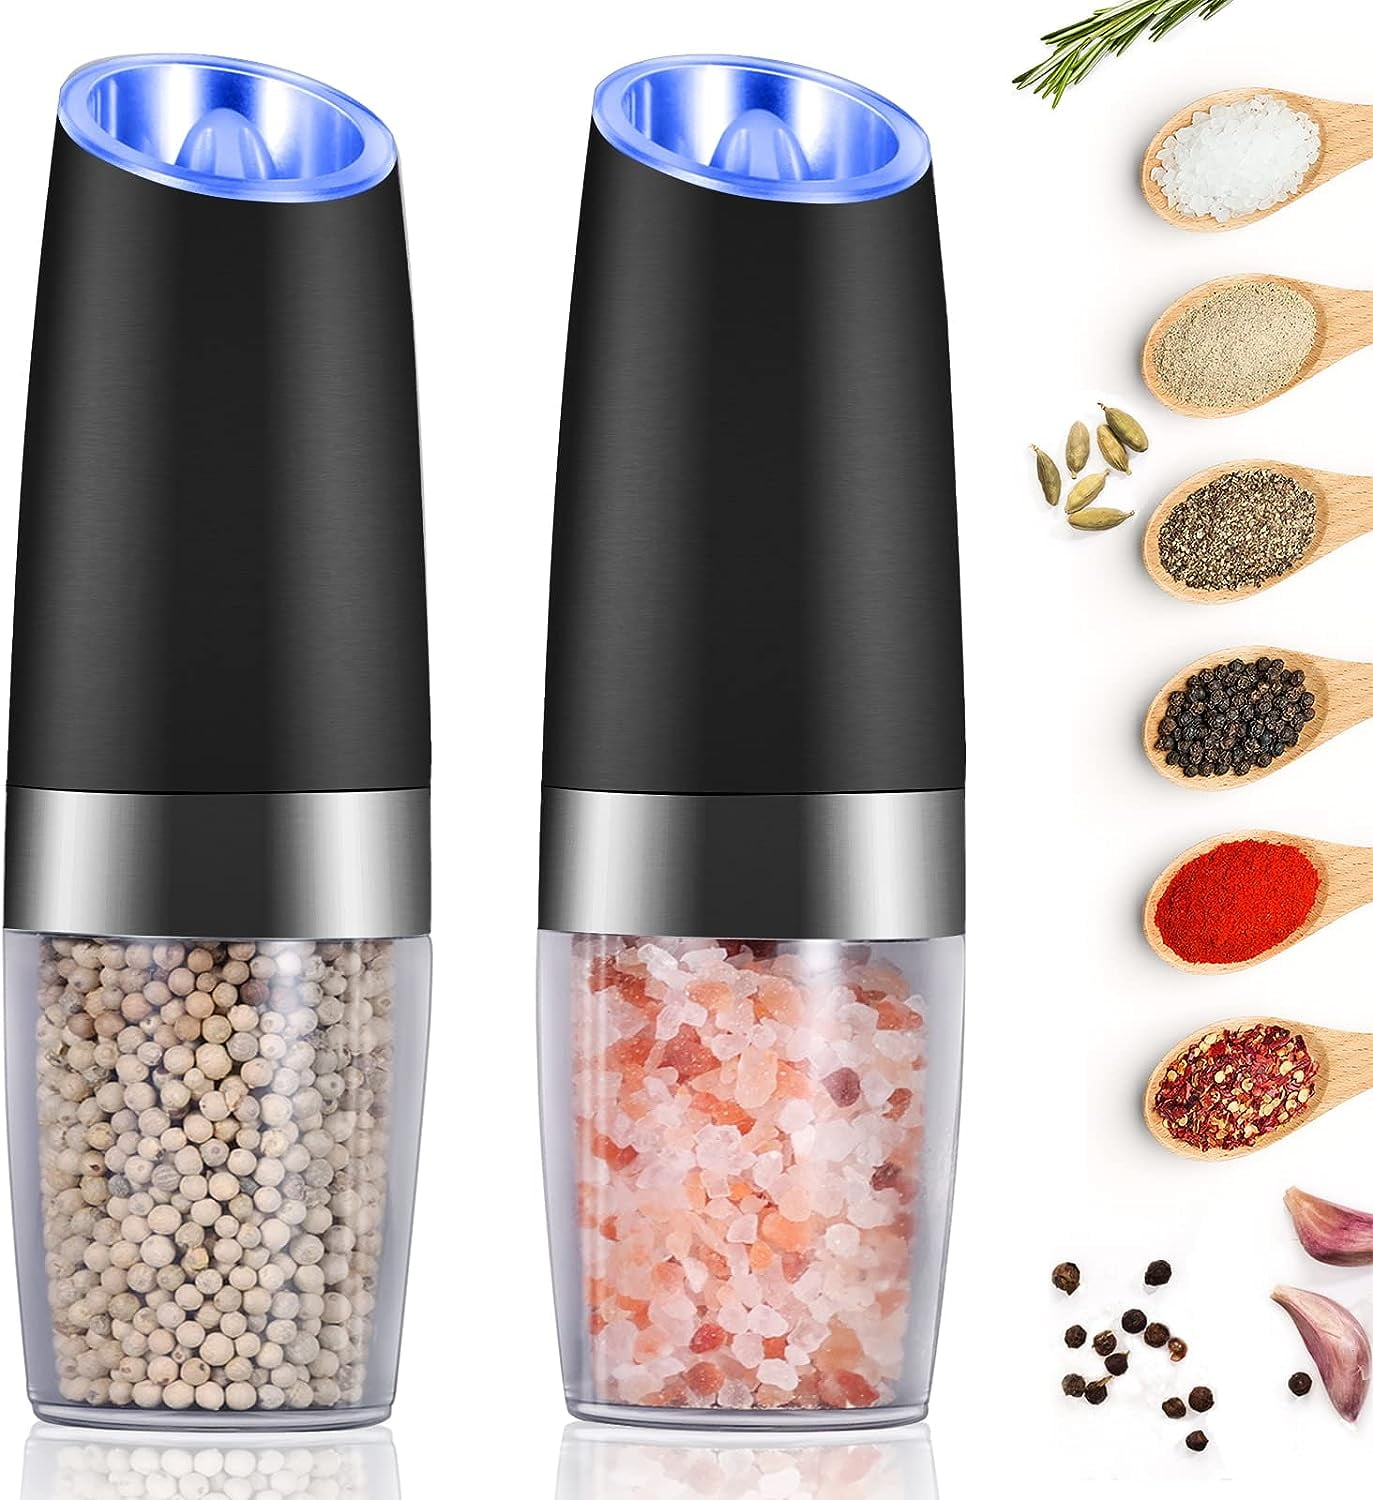 2 Packs Gravity Salt and Pepper Mill Set, Battery Powered with LED